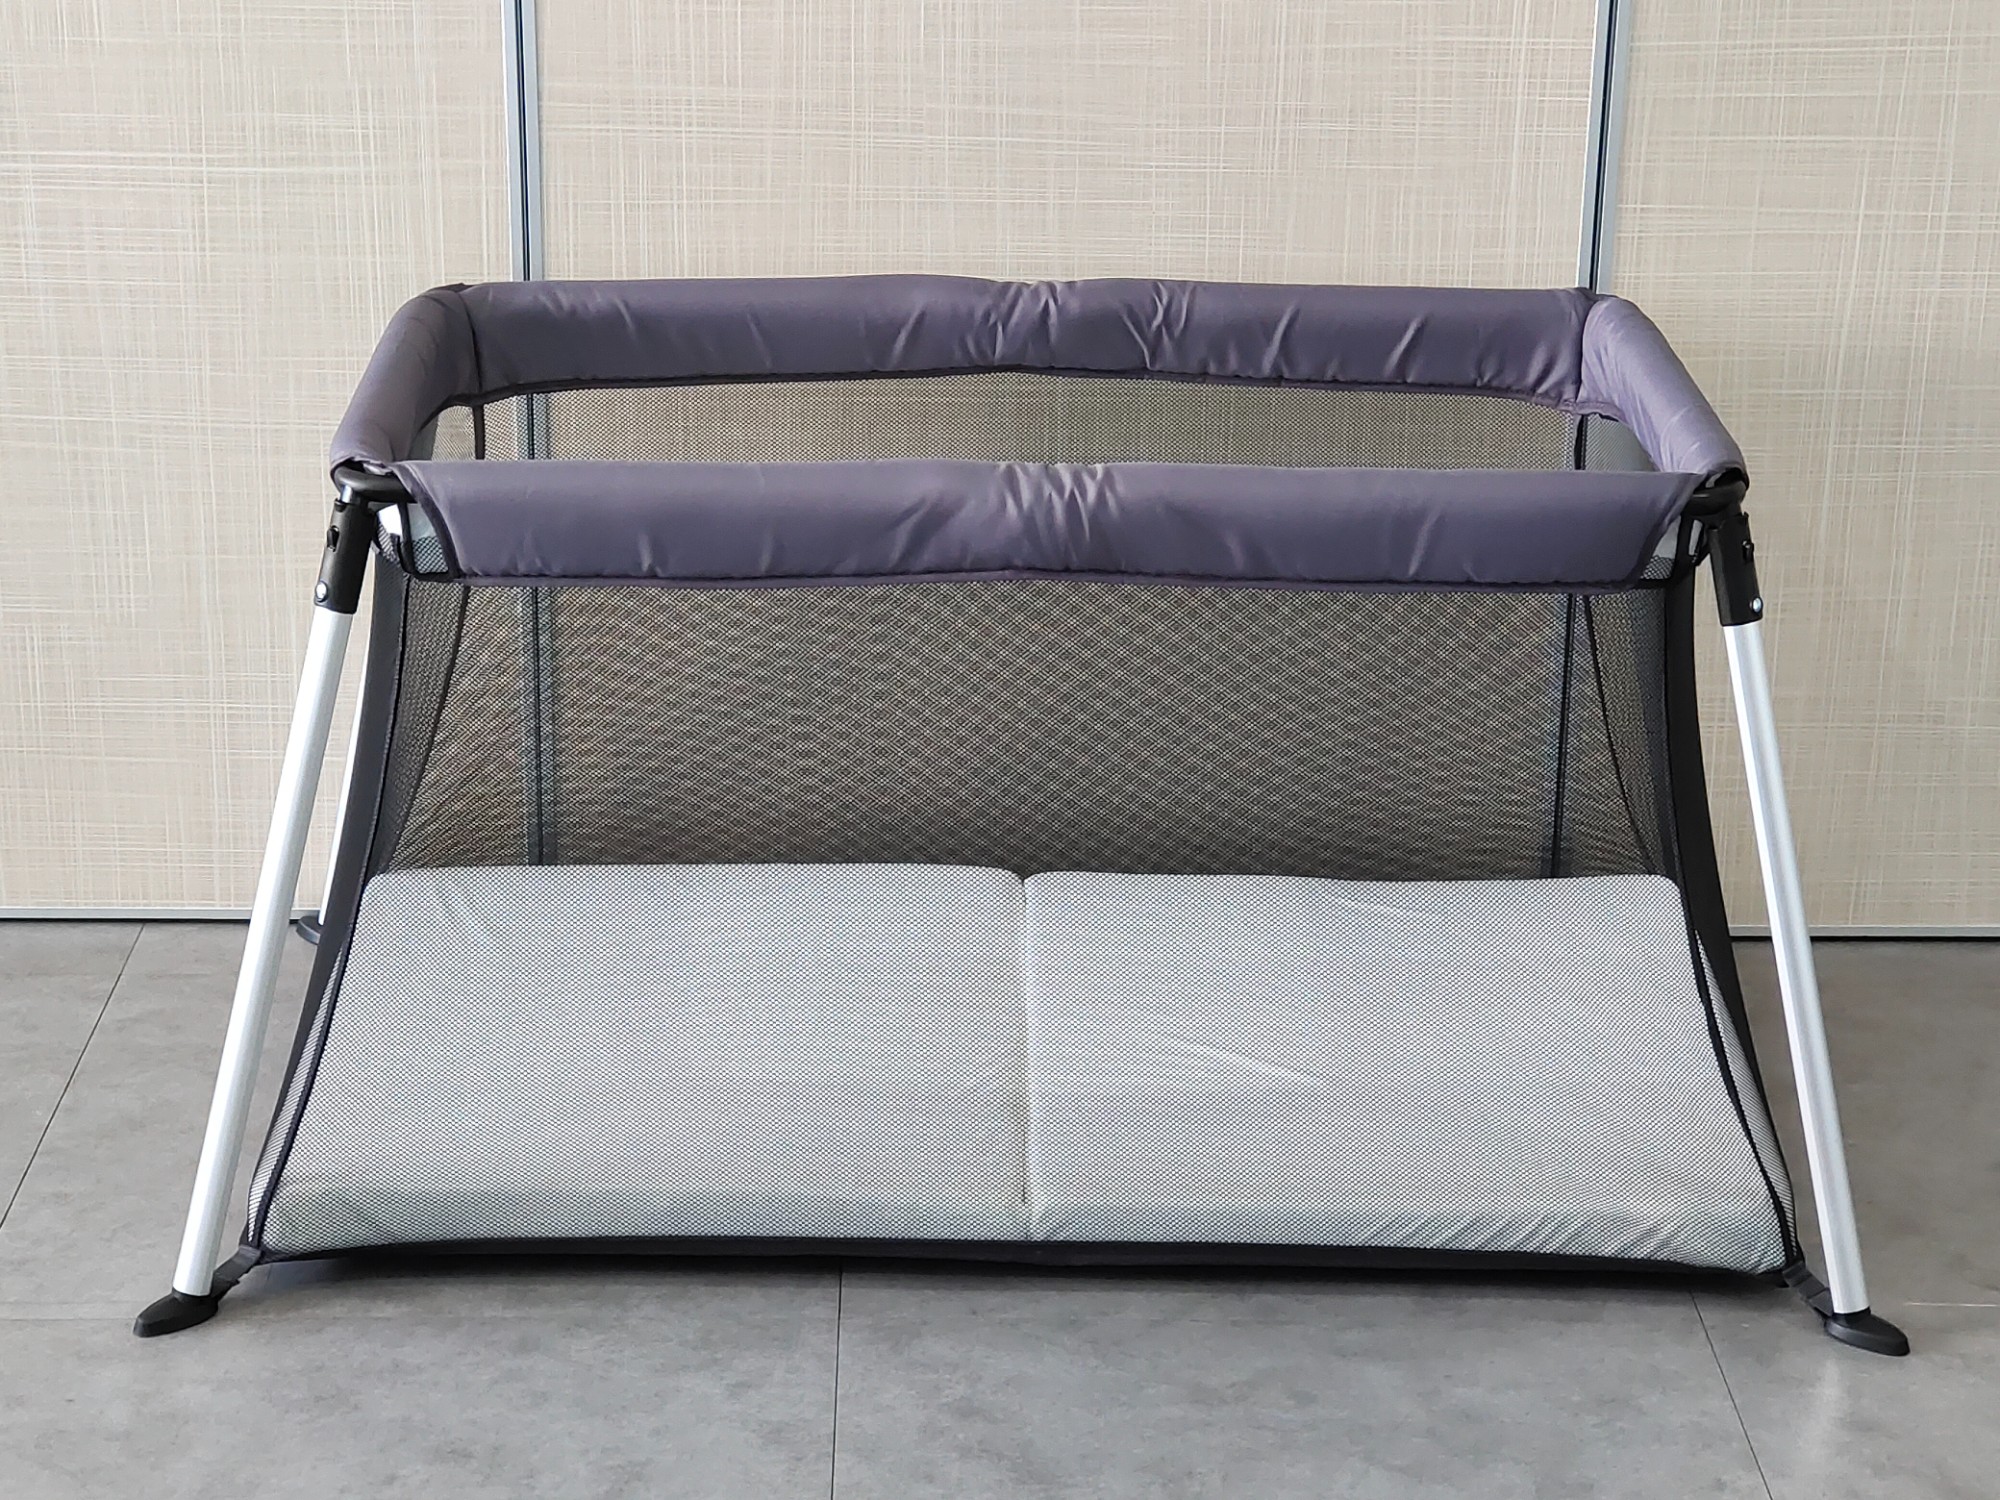 Newborn Baby Travel Cot Baby Crib Portable Child Toddler Cot folded Baby Bed with mattress